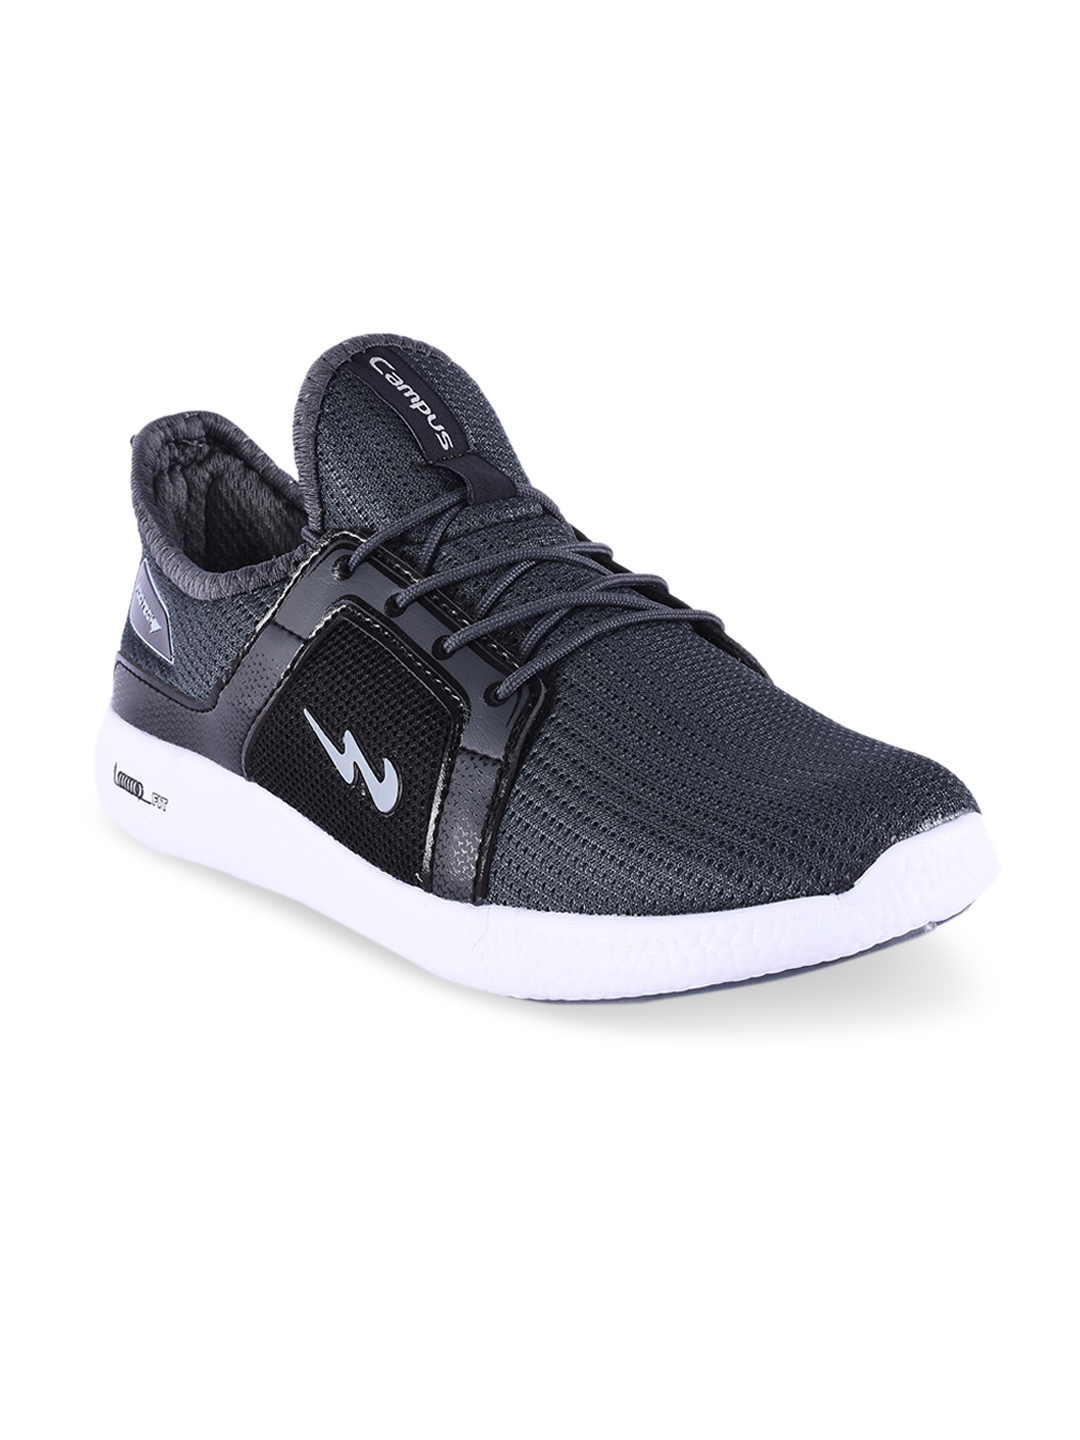 Buy Campus Men Charcoal Mesh Mid Top Running Shoes - Sports Shoes for ...